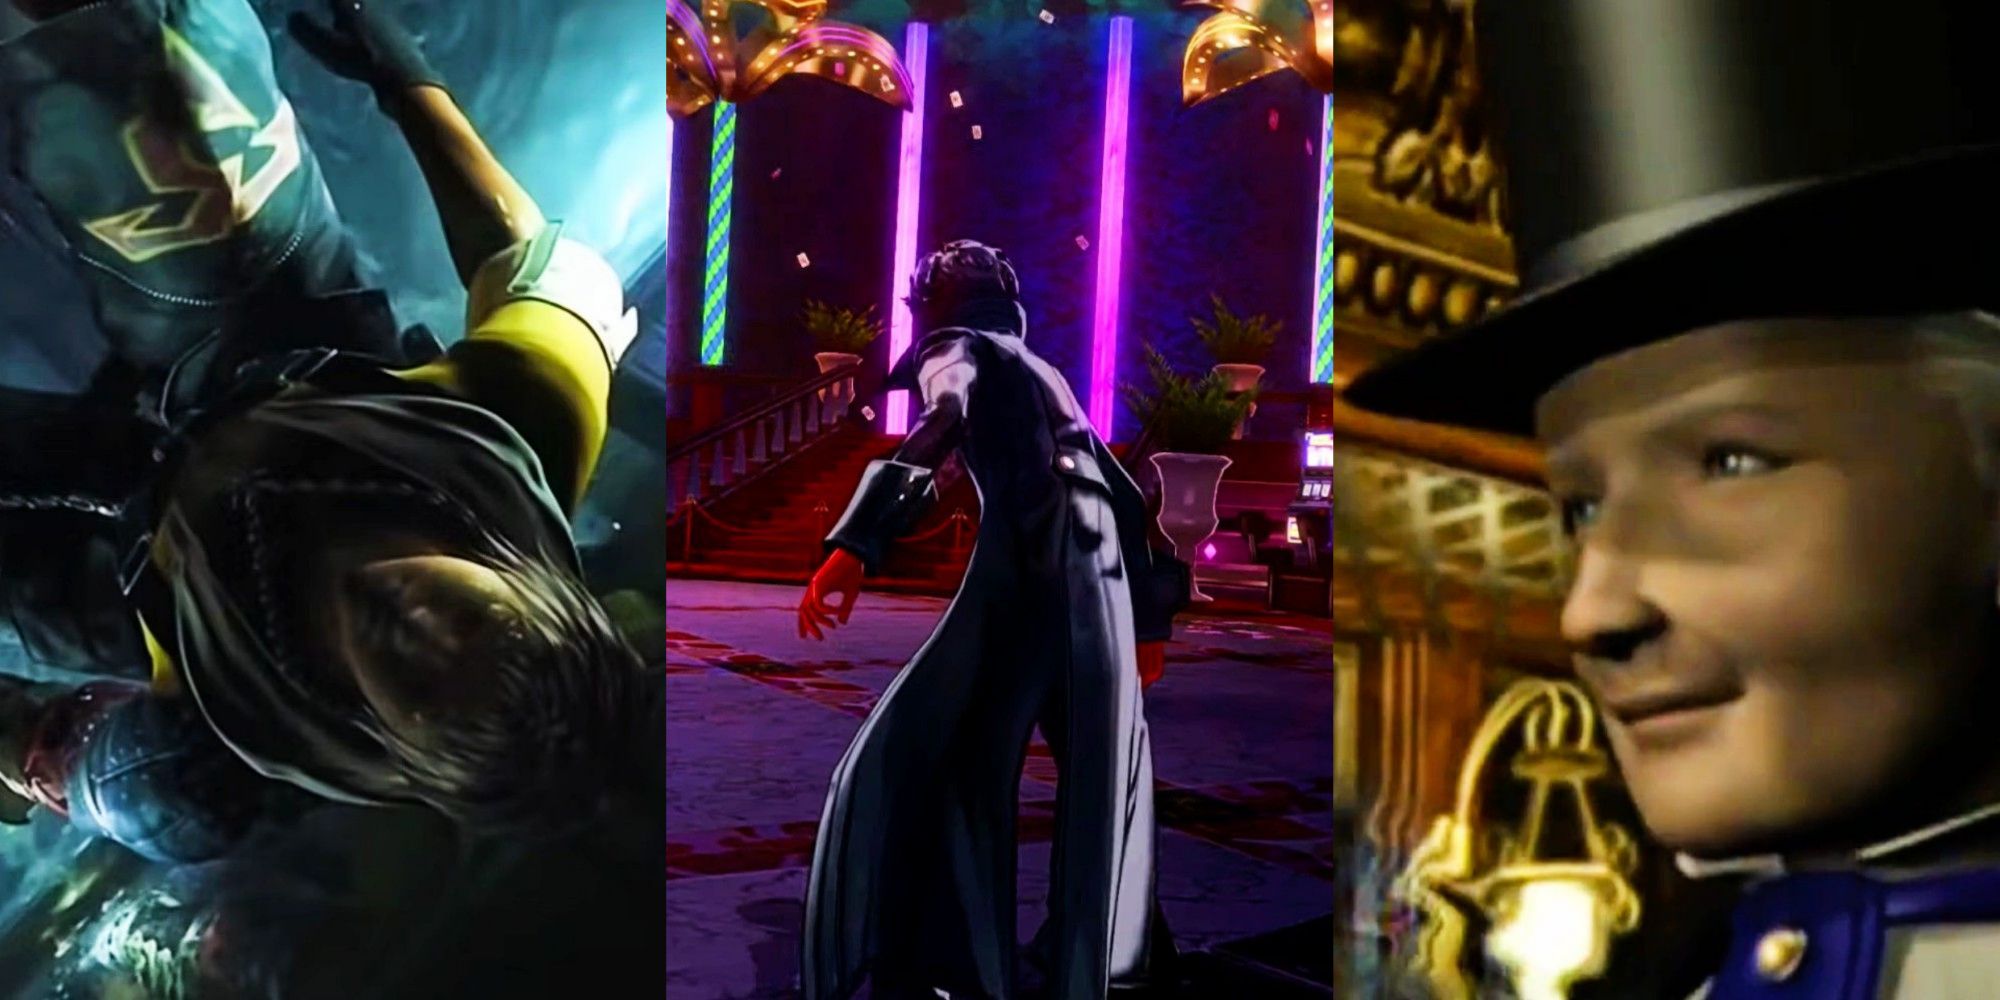 Split image screenshots of Tidus in the FF10 opening, Joker in the Persona 5 opening, and Roger Bacon in the Shadow Hearts 1 opening.